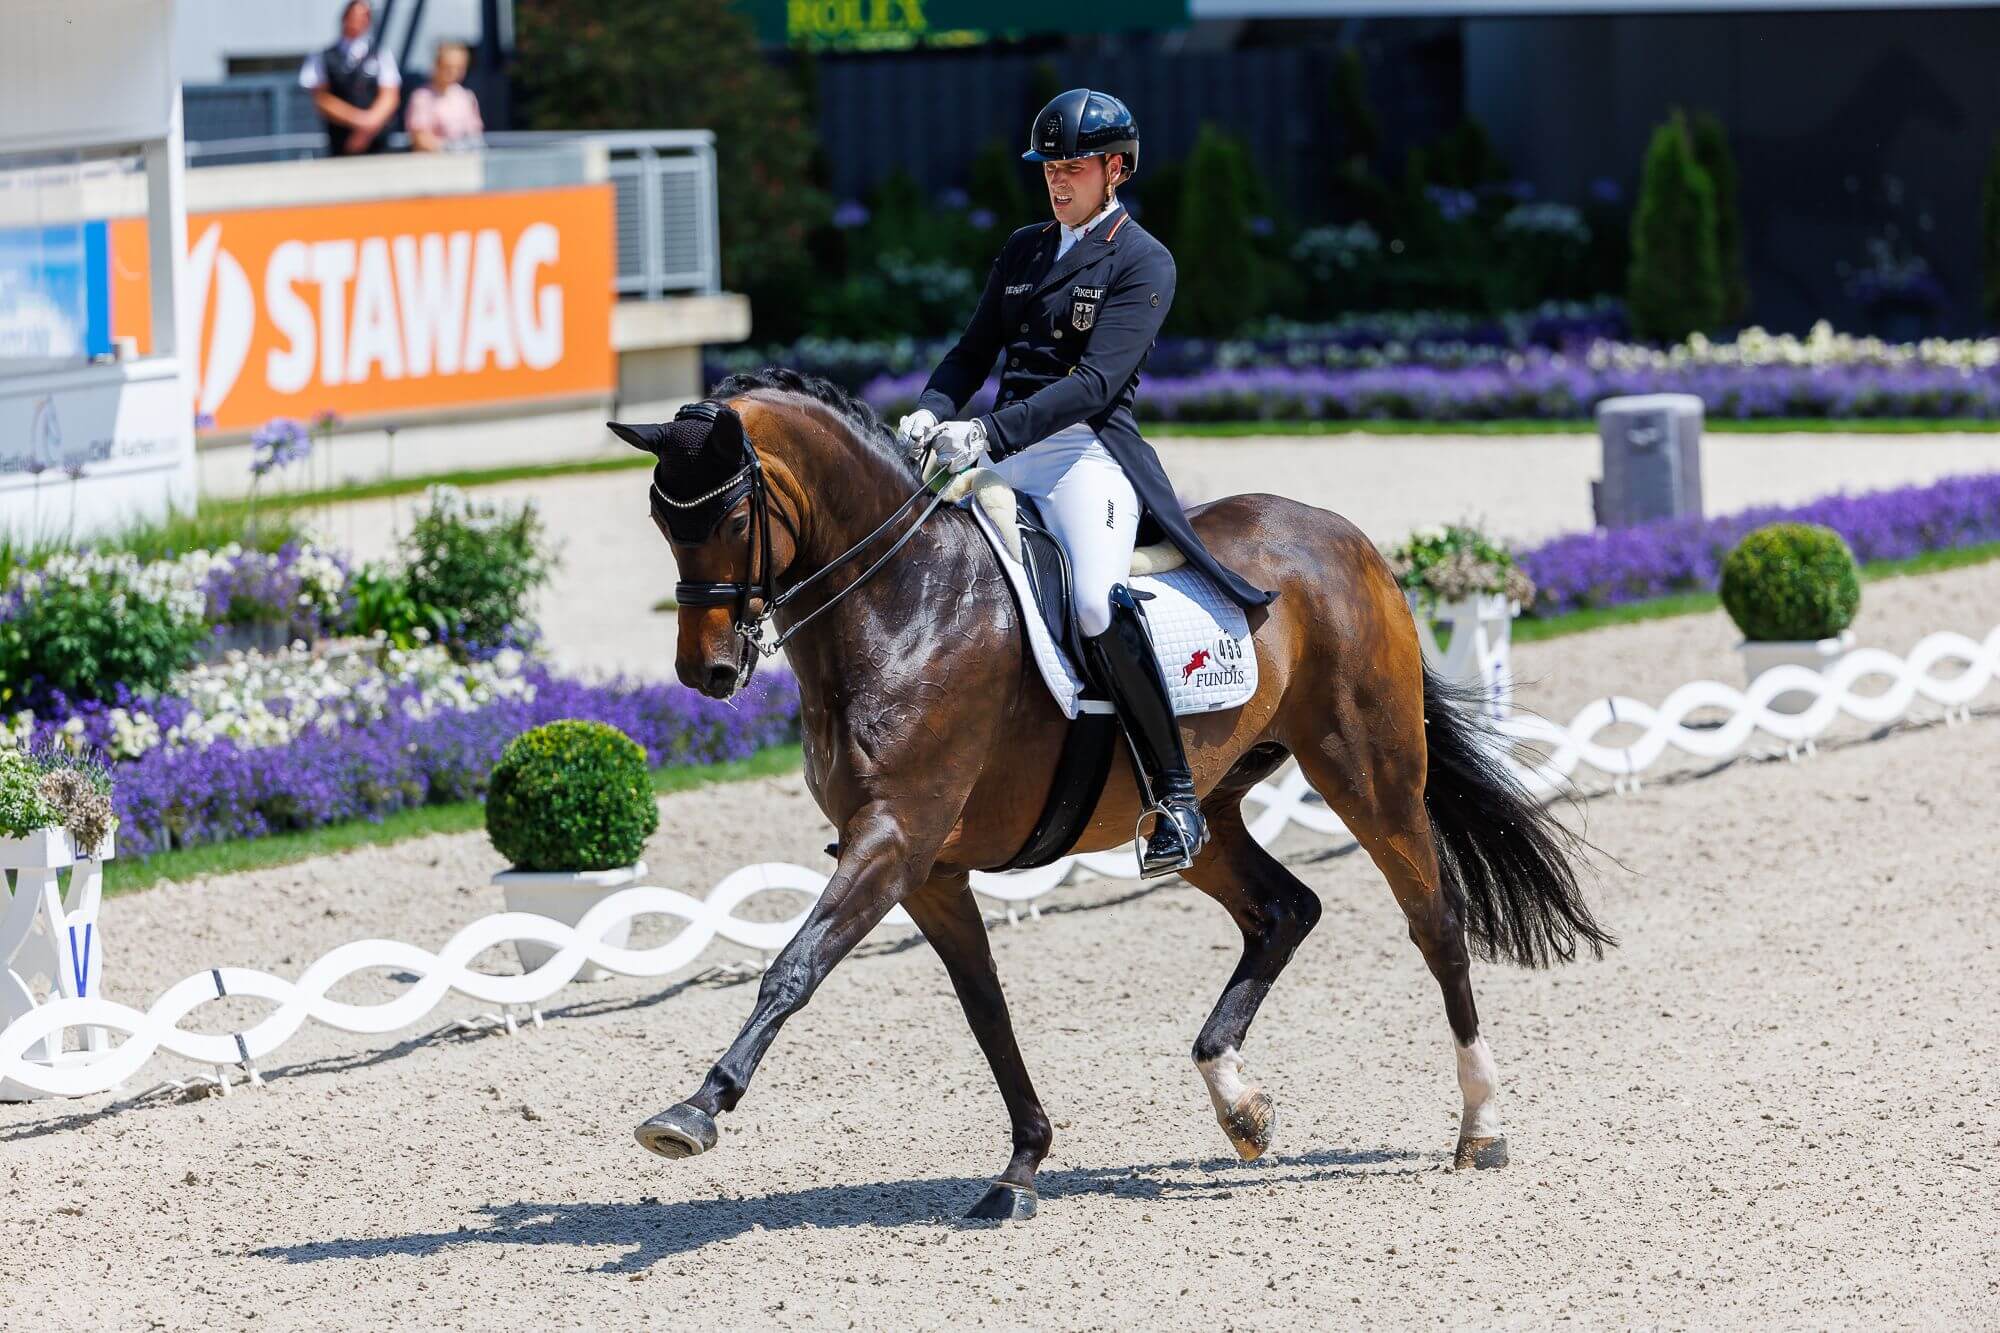 Double win for Frederic Wandres in Dressage World Cup leg Madrid